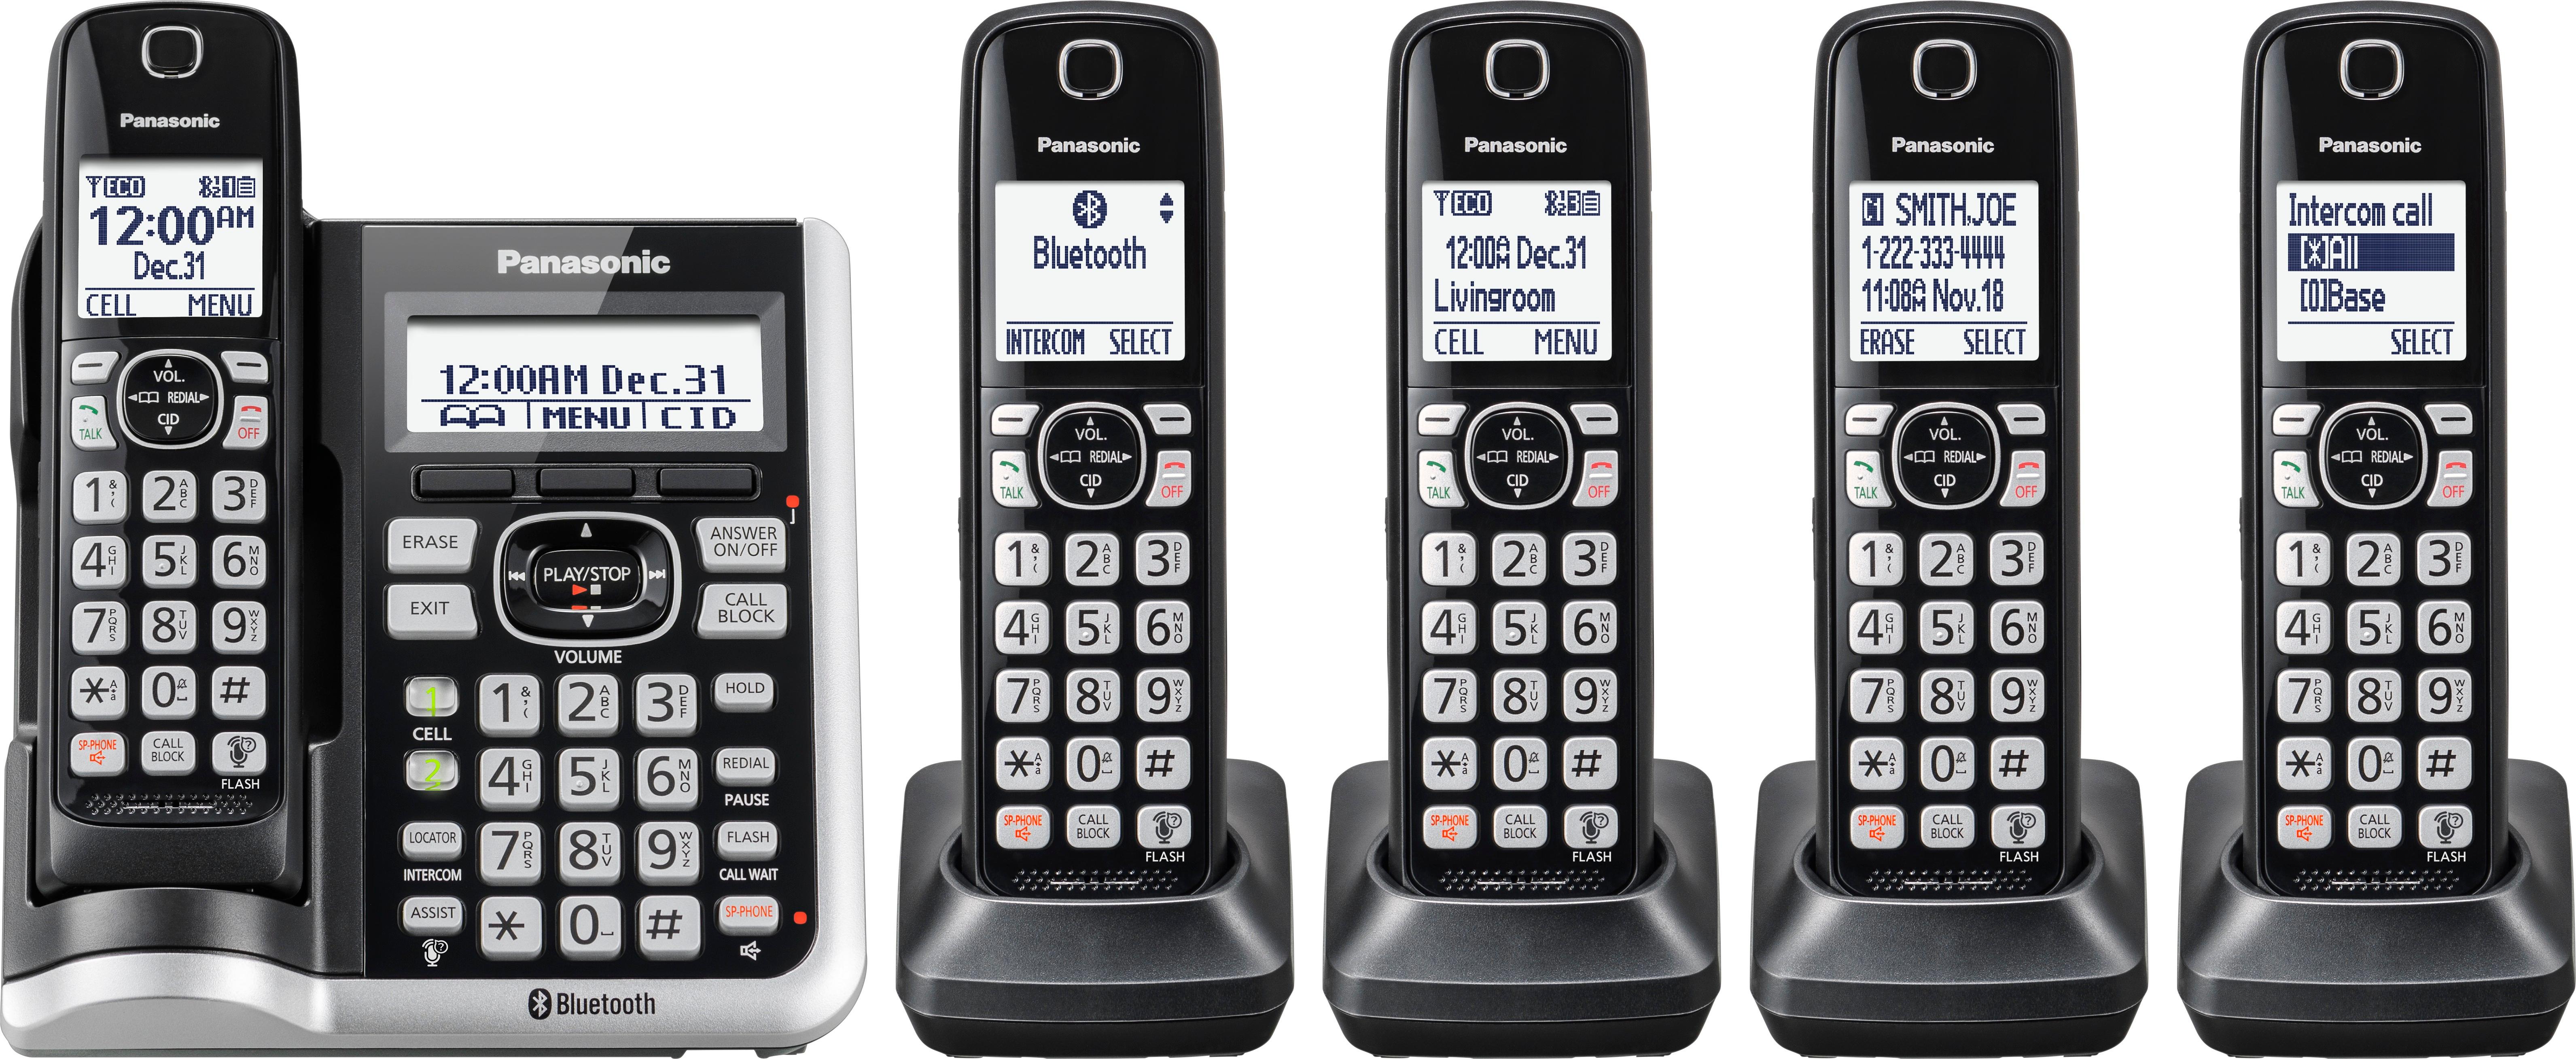 Silver 4 Handsets KX-TGE474S PANASONIC Link2Cell Bluetooth Cordless DECT 6.0 Expandable Phone System with Answering Machine and Enhanced Noise Reduction 